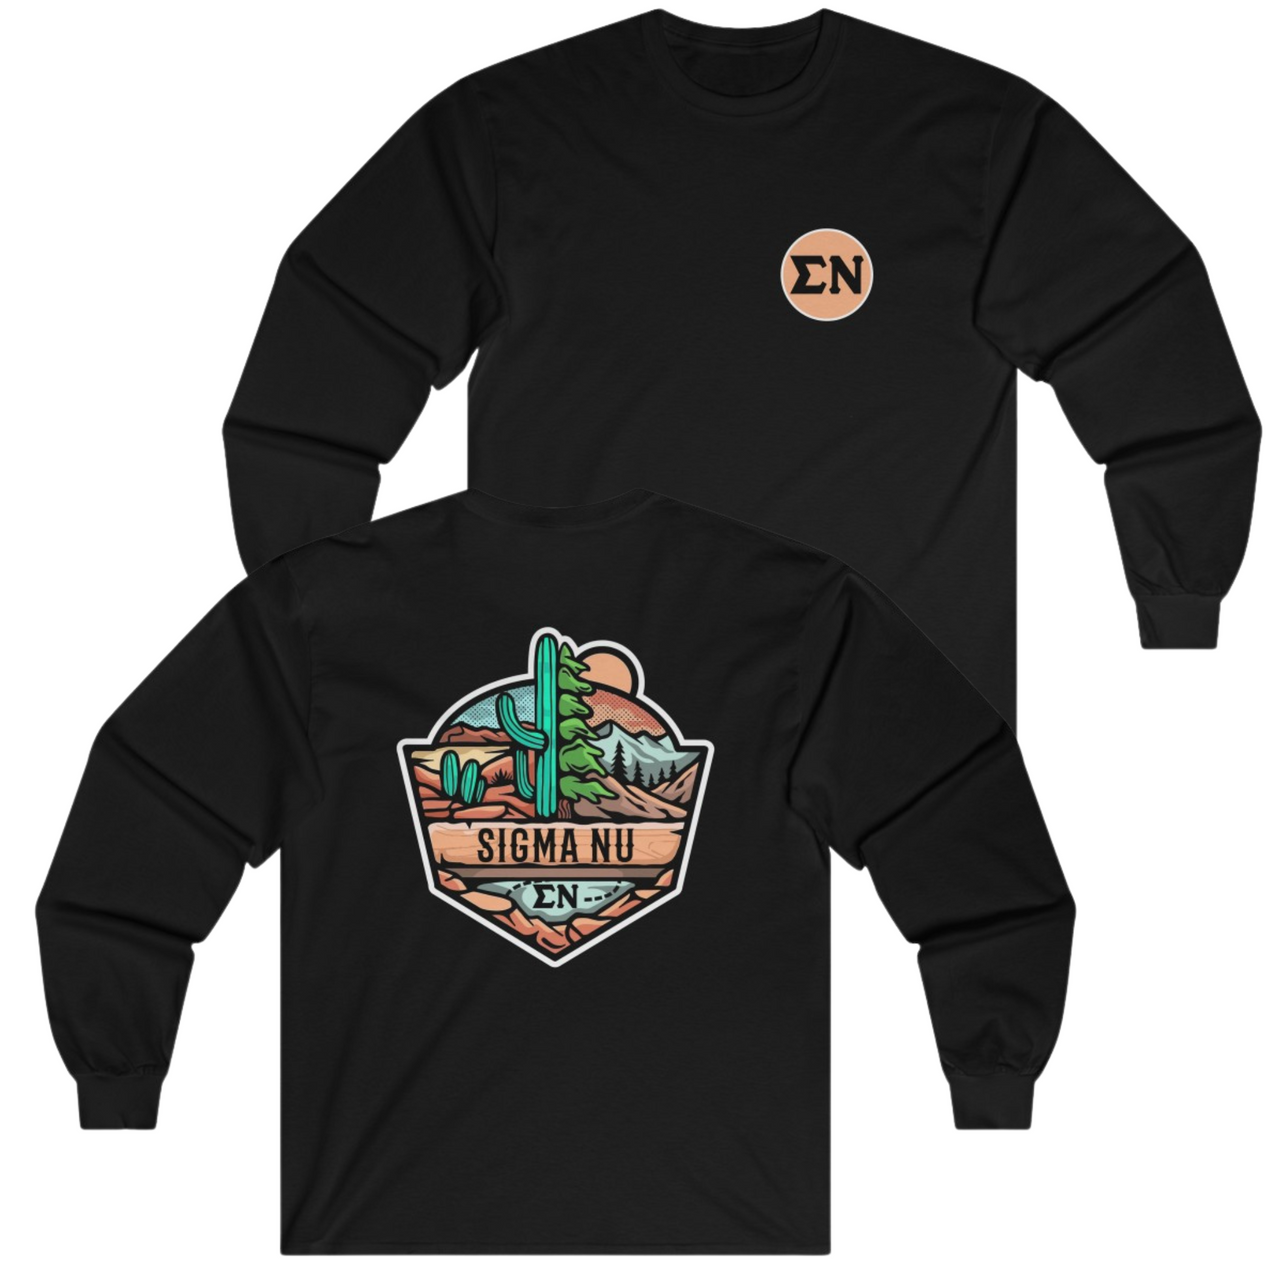 Black Sigma Nu Graphic Long Sleeve T-Shirt | Desert Mountains | Sigma Nu Clothing, Apparel and Merchandise